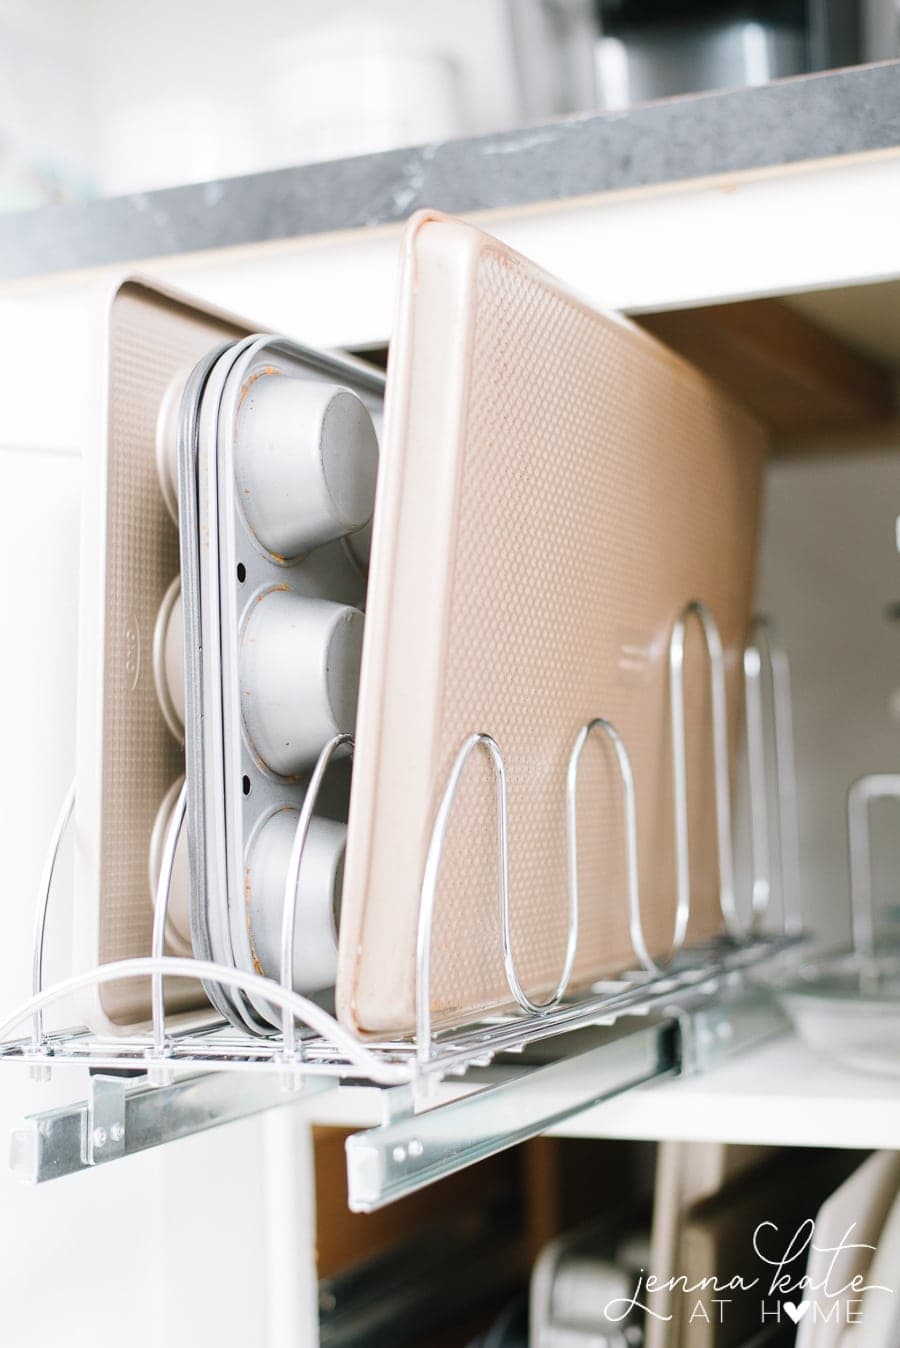 Pull-out shelves for avid bakers to organize their favorite baking pans